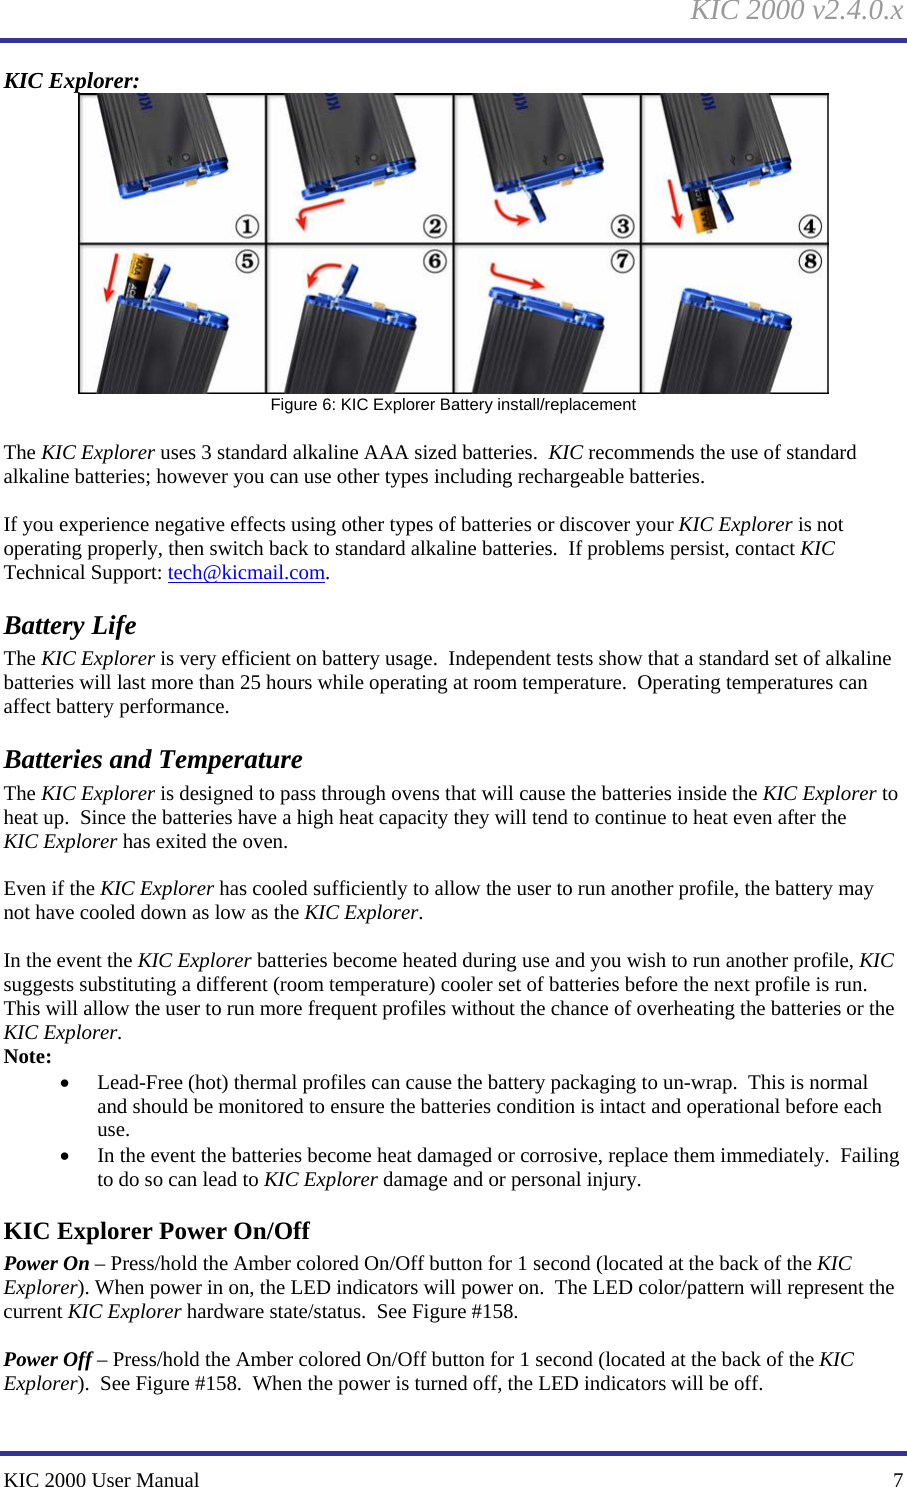 KIC 2000 v2.4.0.x KIC 2000 User Manual    7 KIC Explorer:   Figure 6: KIC Explorer Battery install/replacement   The KIC Explorer uses 3 standard alkaline AAA sized batteries.  KIC recommends the use of standard alkaline batteries; however you can use other types including rechargeable batteries.    If you experience negative effects using other types of batteries or discover your KIC Explorer is not operating properly, then switch back to standard alkaline batteries.  If problems persist, contact KIC Technical Support: tech@kicmail.com.   Battery Life The KIC Explorer is very efficient on battery usage.  Independent tests show that a standard set of alkaline batteries will last more than 25 hours while operating at room temperature.  Operating temperatures can affect battery performance.   Batteries and Temperature The KIC Explorer is designed to pass through ovens that will cause the batteries inside the KIC Explorer to heat up.  Since the batteries have a high heat capacity they will tend to continue to heat even after the KIC Explorer has exited the oven.    Even if the KIC Explorer has cooled sufficiently to allow the user to run another profile, the battery may not have cooled down as low as the KIC Explorer.    In the event the KIC Explorer batteries become heated during use and you wish to run another profile, KIC suggests substituting a different (room temperature) cooler set of batteries before the next profile is run.  This will allow the user to run more frequent profiles without the chance of overheating the batteries or the KIC Explorer.   Note: • Lead-Free (hot) thermal profiles can cause the battery packaging to un-wrap.  This is normal and should be monitored to ensure the batteries condition is intact and operational before each use.   • In the event the batteries become heat damaged or corrosive, replace them immediately.  Failing to do so can lead to KIC Explorer damage and or personal injury.   KIC Explorer Power On/Off Power On – Press/hold the Amber colored On/Off button for 1 second (located at the back of the KIC Explorer). When power in on, the LED indicators will power on.  The LED color/pattern will represent the current KIC Explorer hardware state/status.  See Figure #158.    Power Off – Press/hold the Amber colored On/Off button for 1 second (located at the back of the KIC Explorer).  See Figure #158.  When the power is turned off, the LED indicators will be off.   